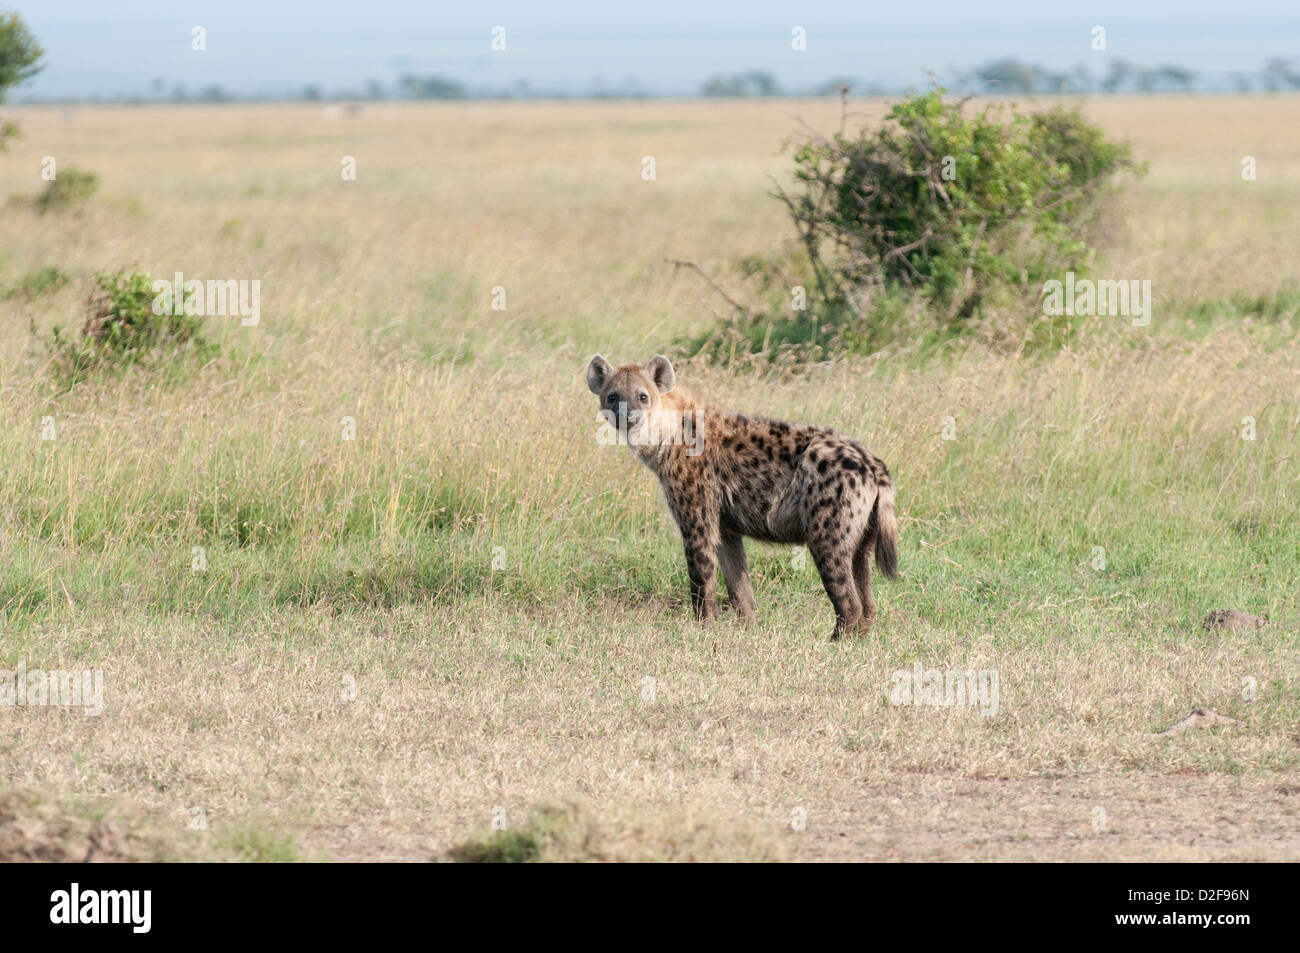 Spotted hyaena standing in grassland viewed from its left side with bush in background Stock Photo